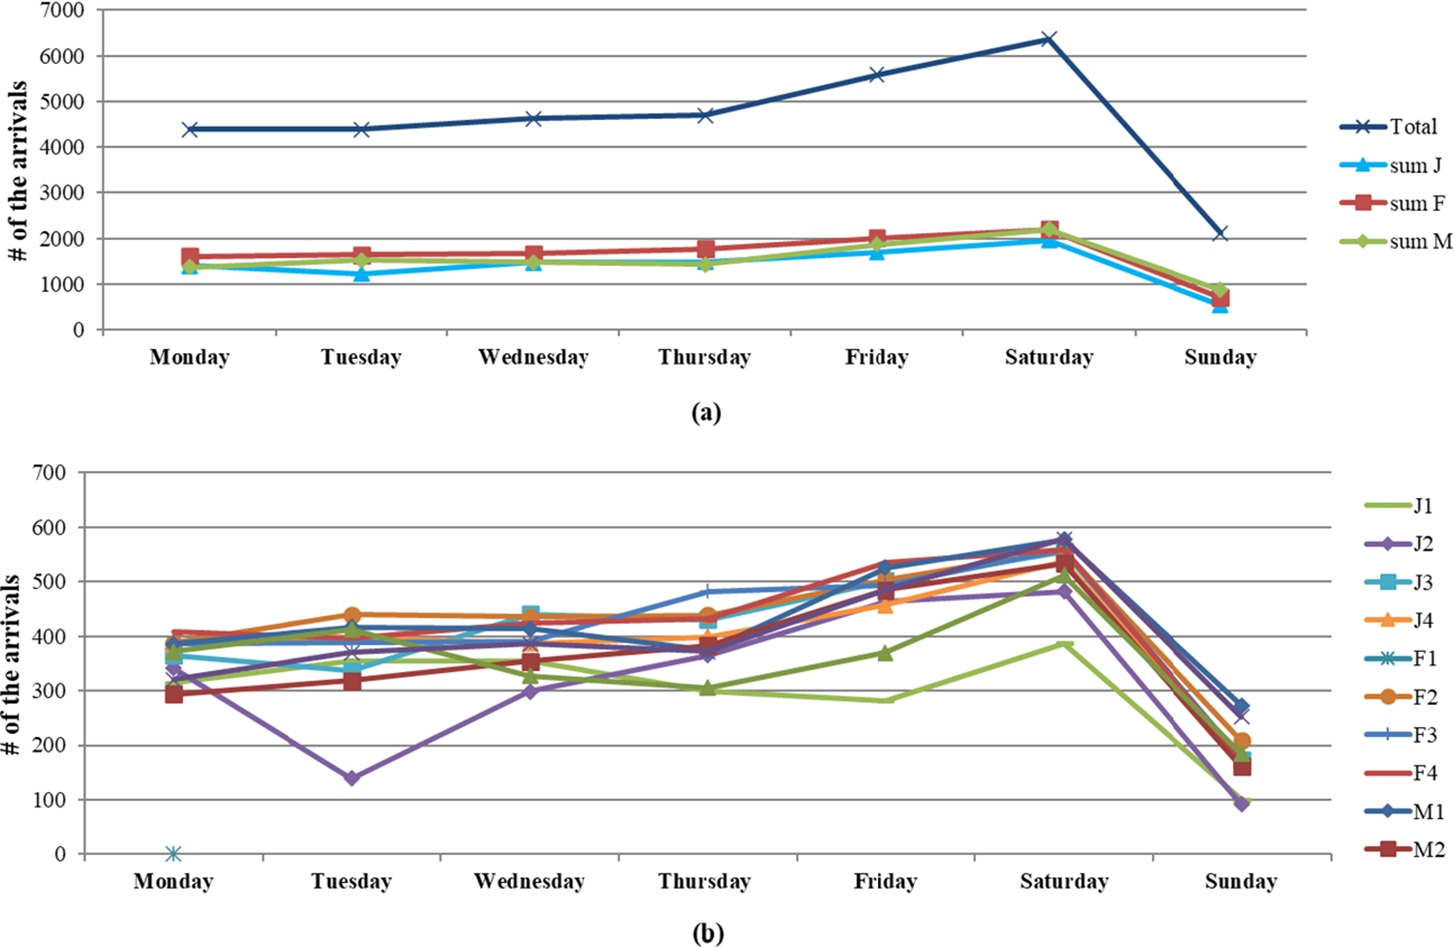 The number of customers based on days of the week.